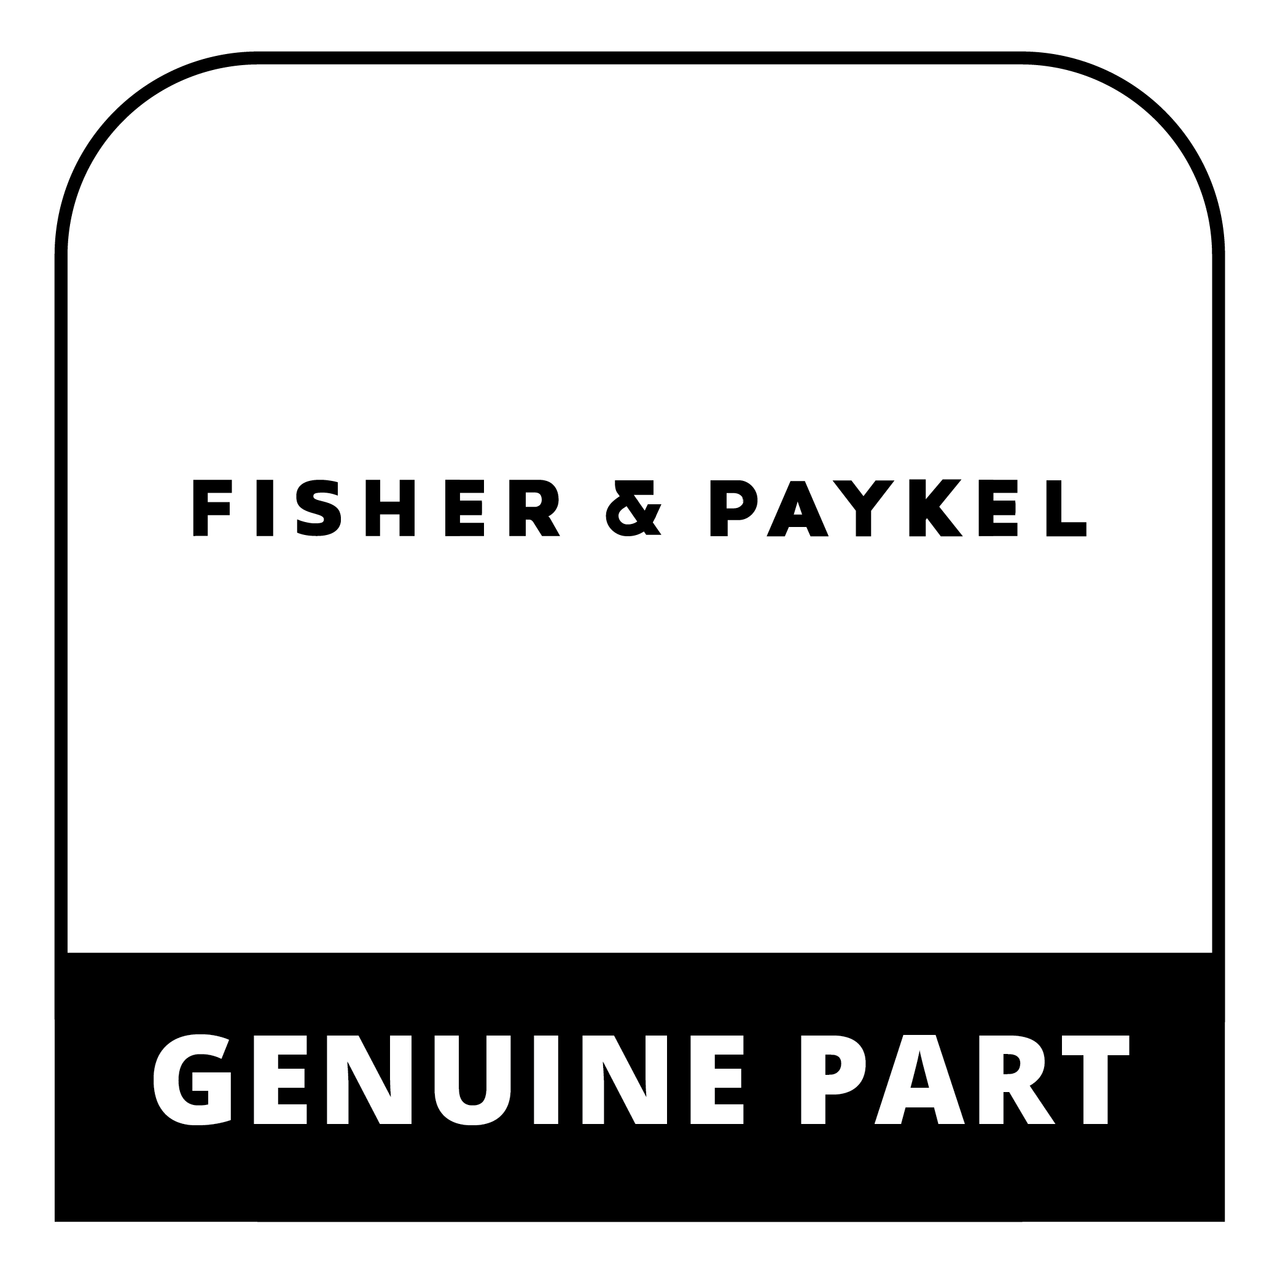 Fisher & Paykel 591605 - Bookset Be1 Dcs Usca - Genuine Fisher & Paykel (DCS) Part